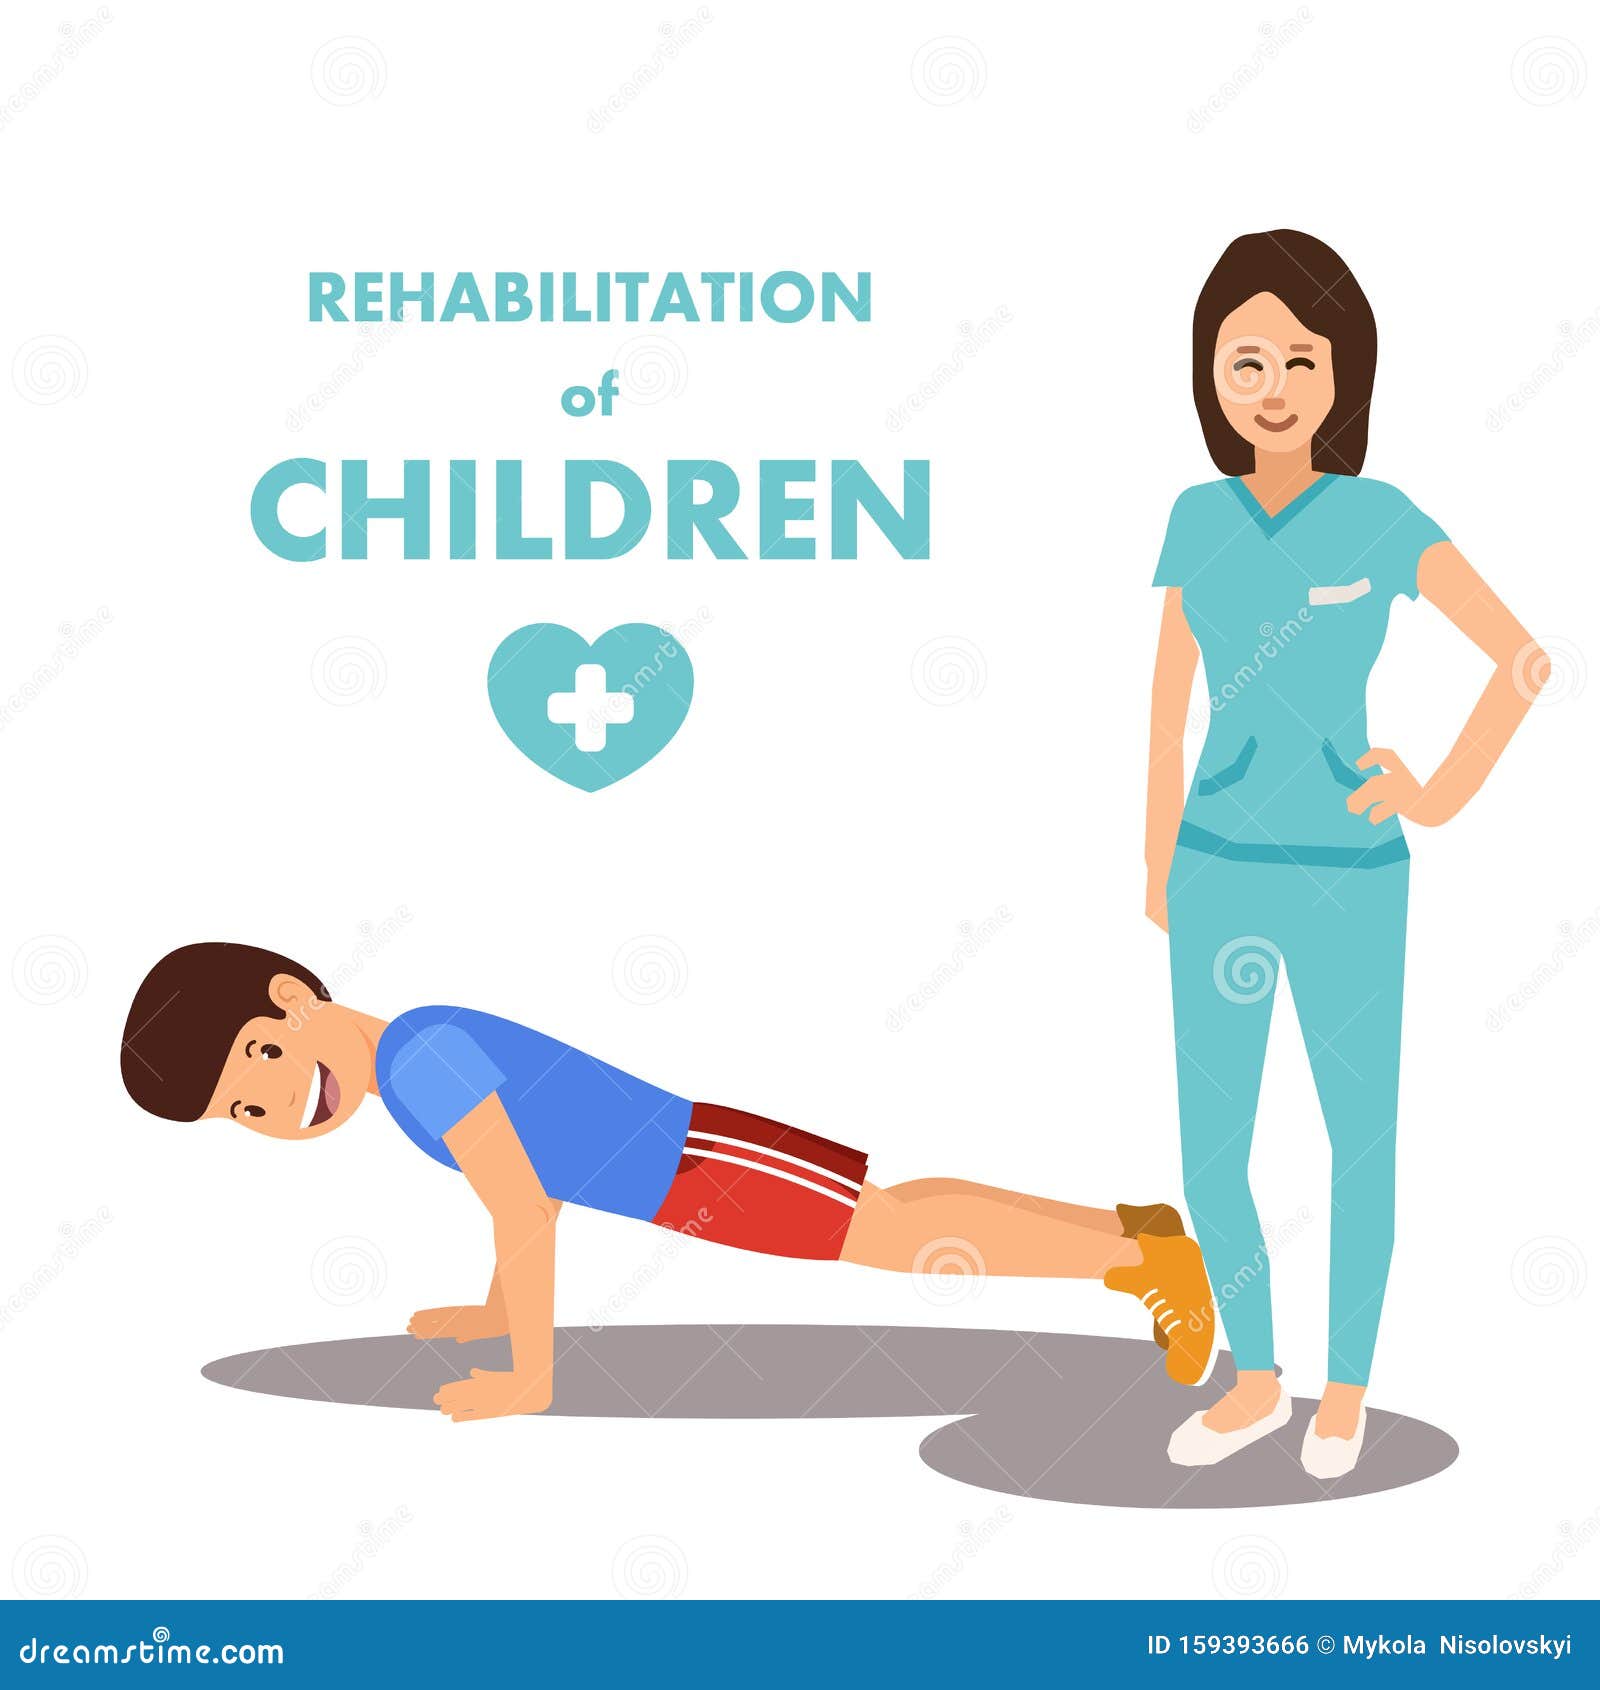 physical development and rehab for children advert